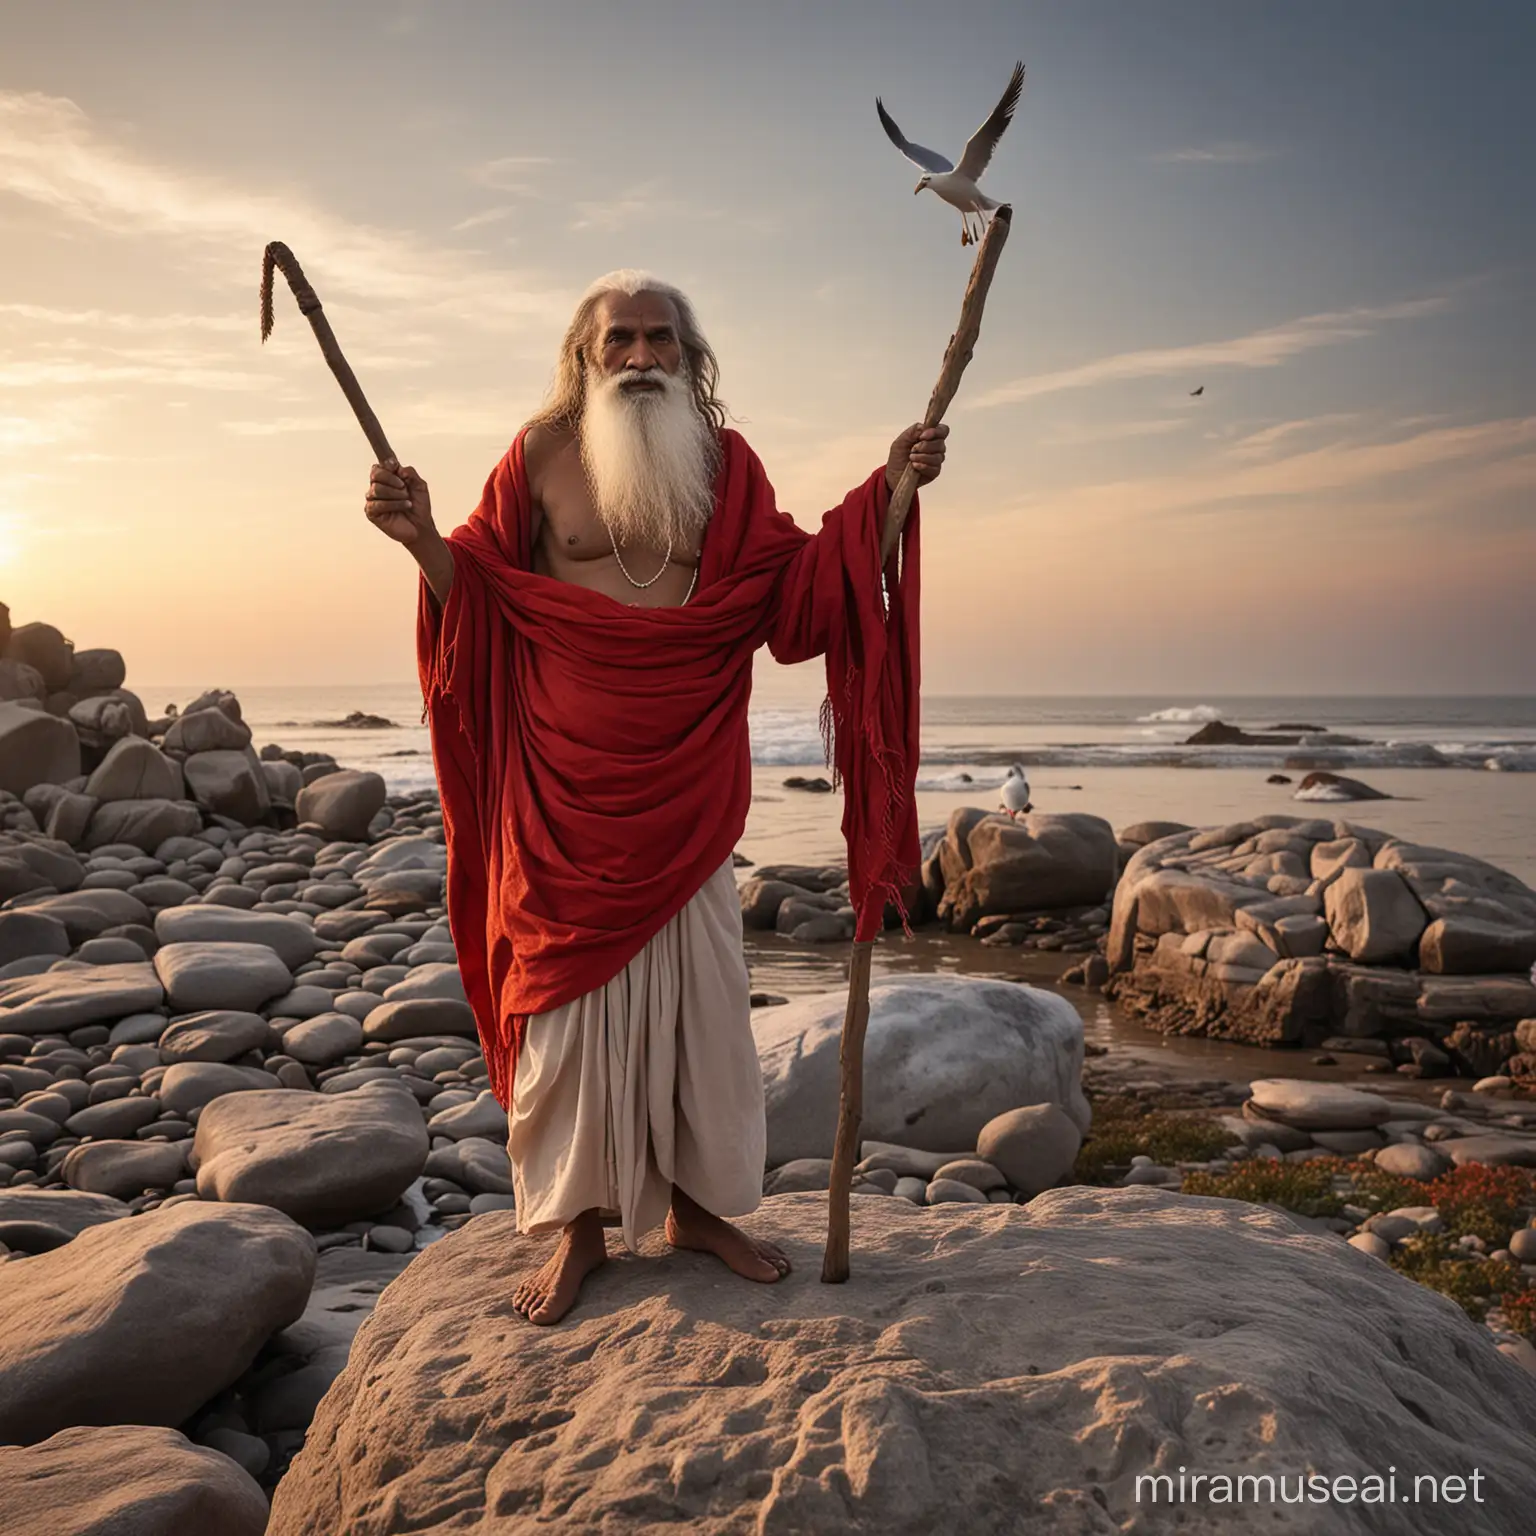 sadhu 80 years old white skin with hair and longbeard wearing a red cloth holding a stick is standing on a stone rock by sunset light sky with some seagullsflying around full boxy fotorealistisch fuji xt3